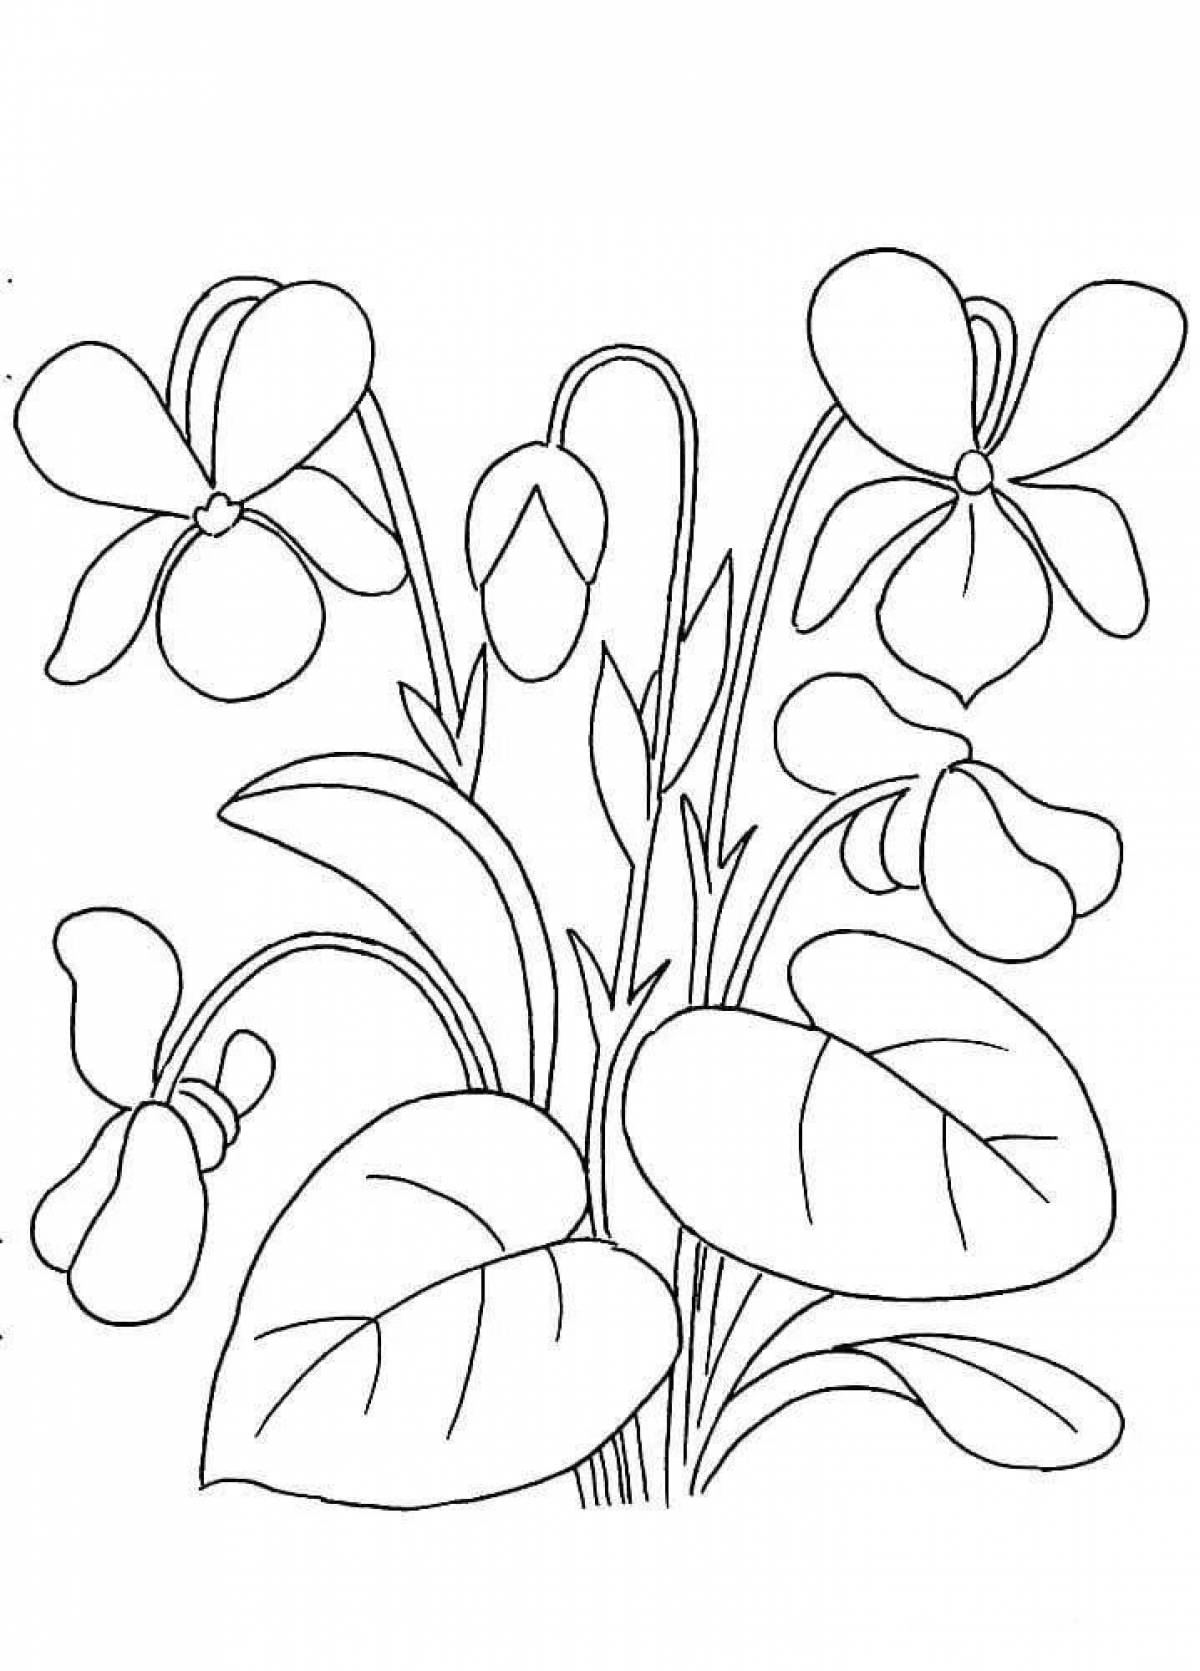 Great plant coloring book for kids